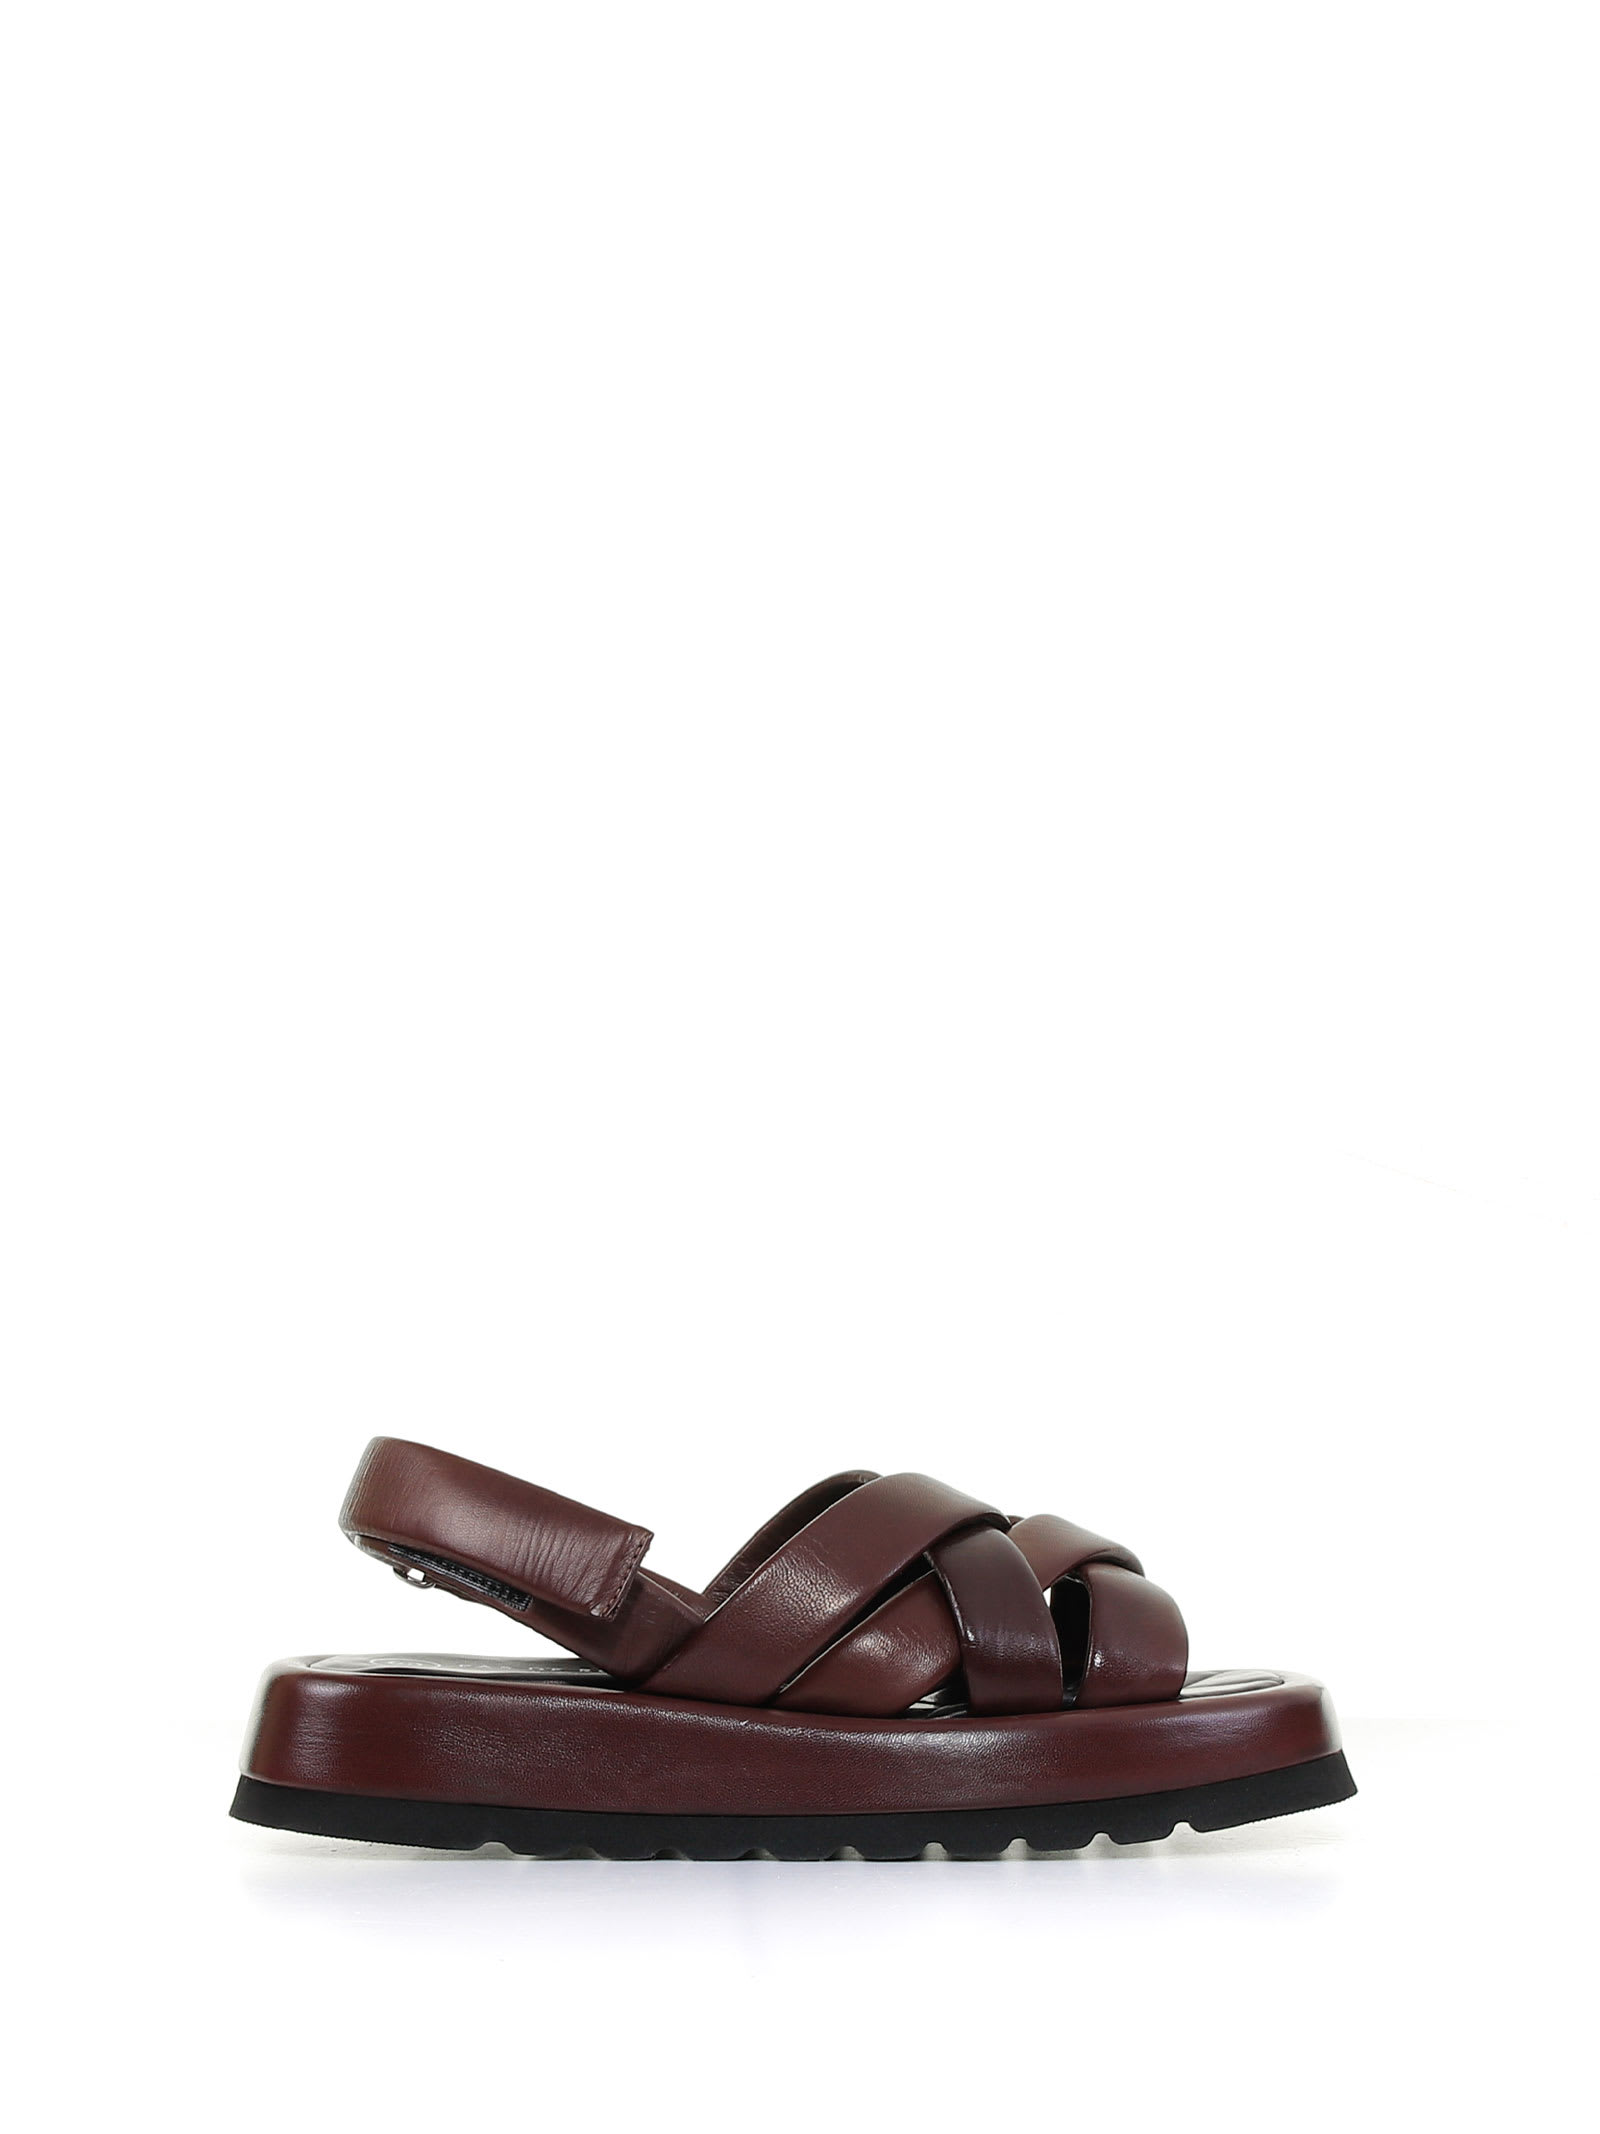 Pas de Rouge China Sandal In Dark Brown Nappa Leather